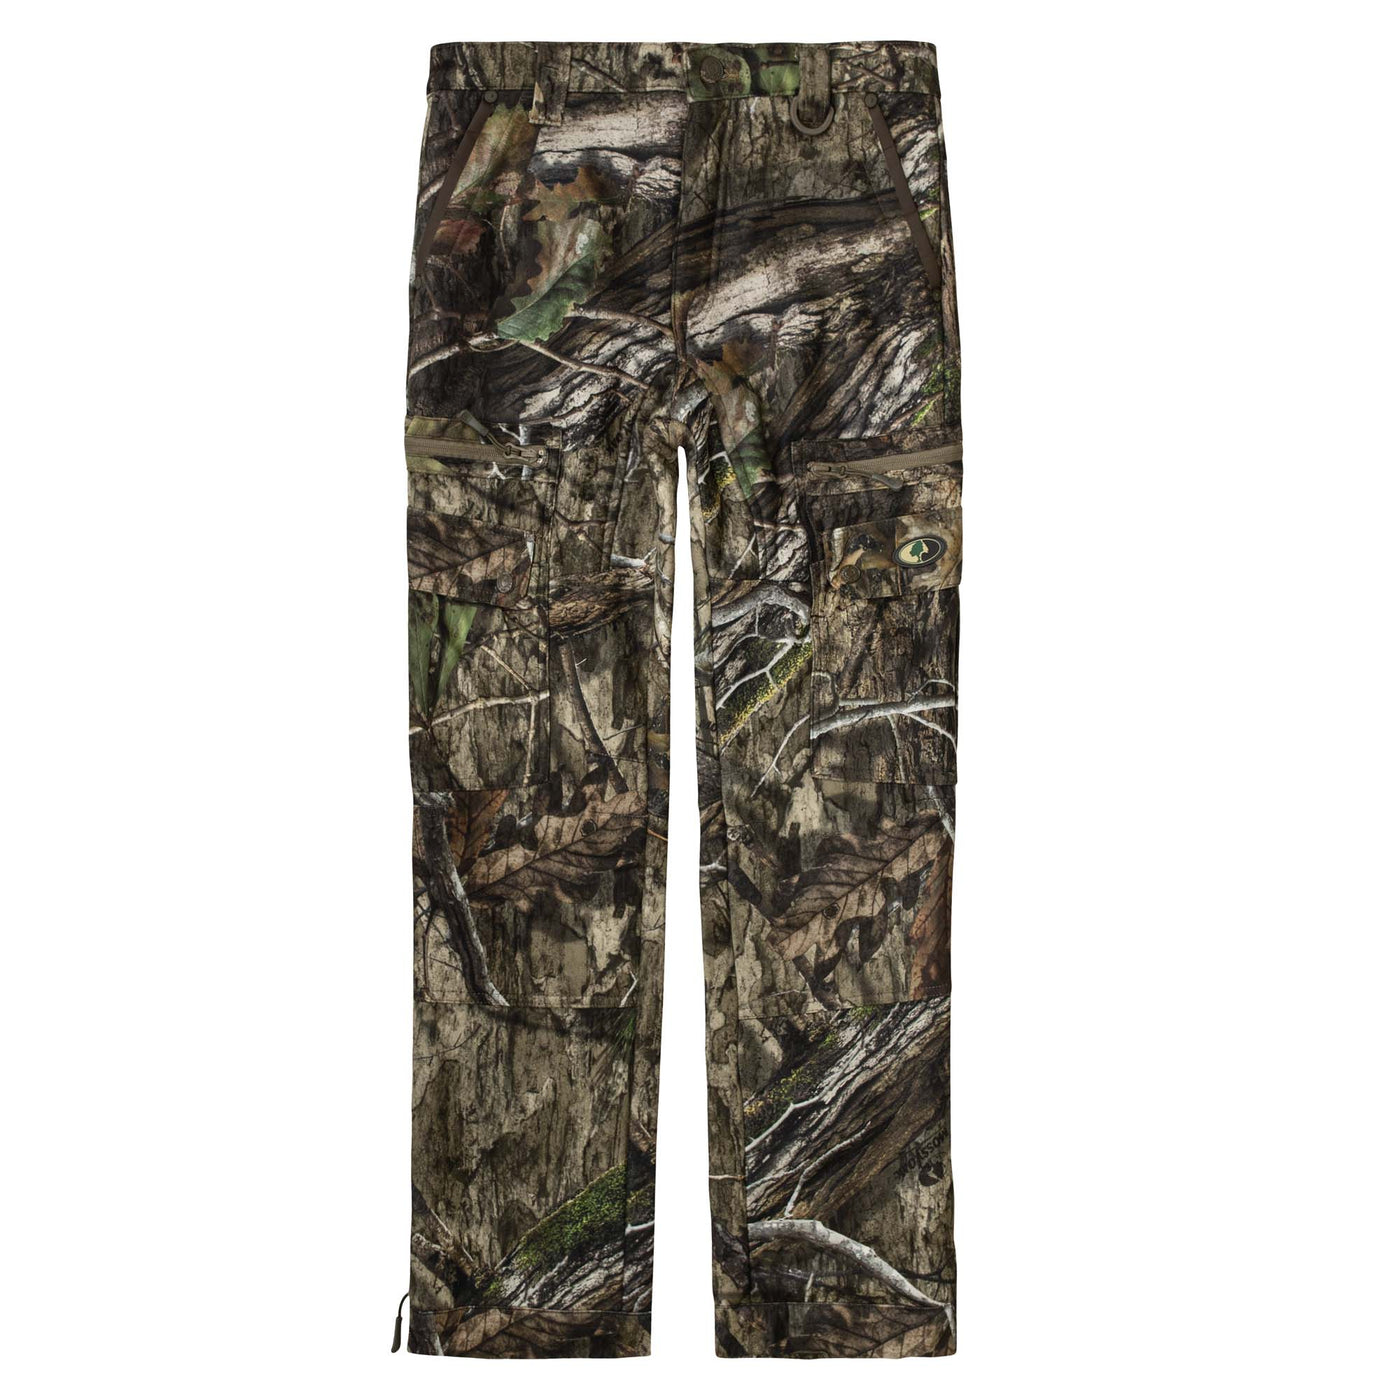 Mossy Oak Youth Sherpa 2.0 Lined Pant DNA 